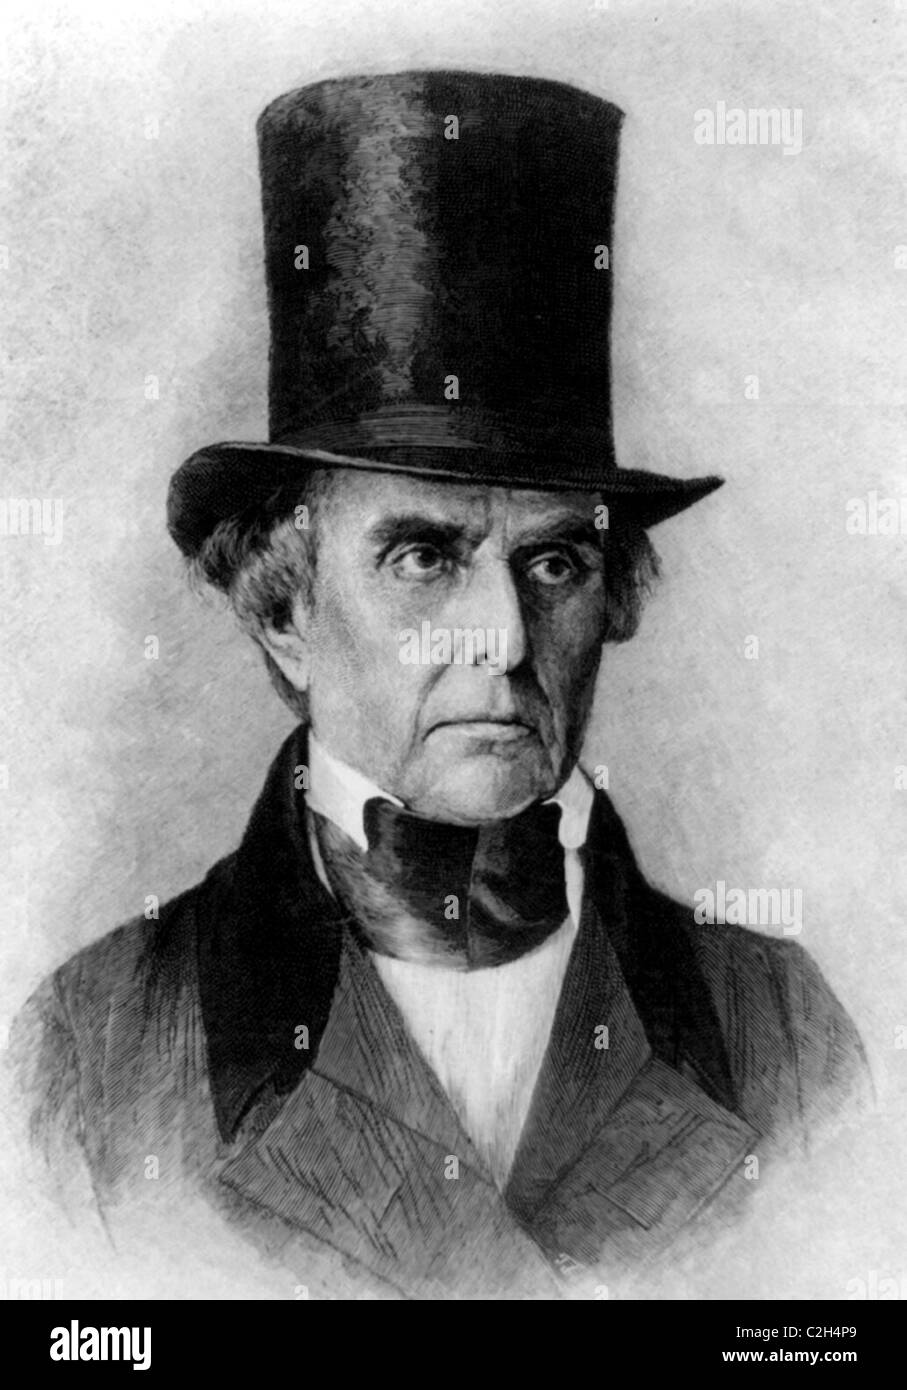 Daniel Webster leading American statesman and senator during the nation's Antebellum Period. Stock Photo